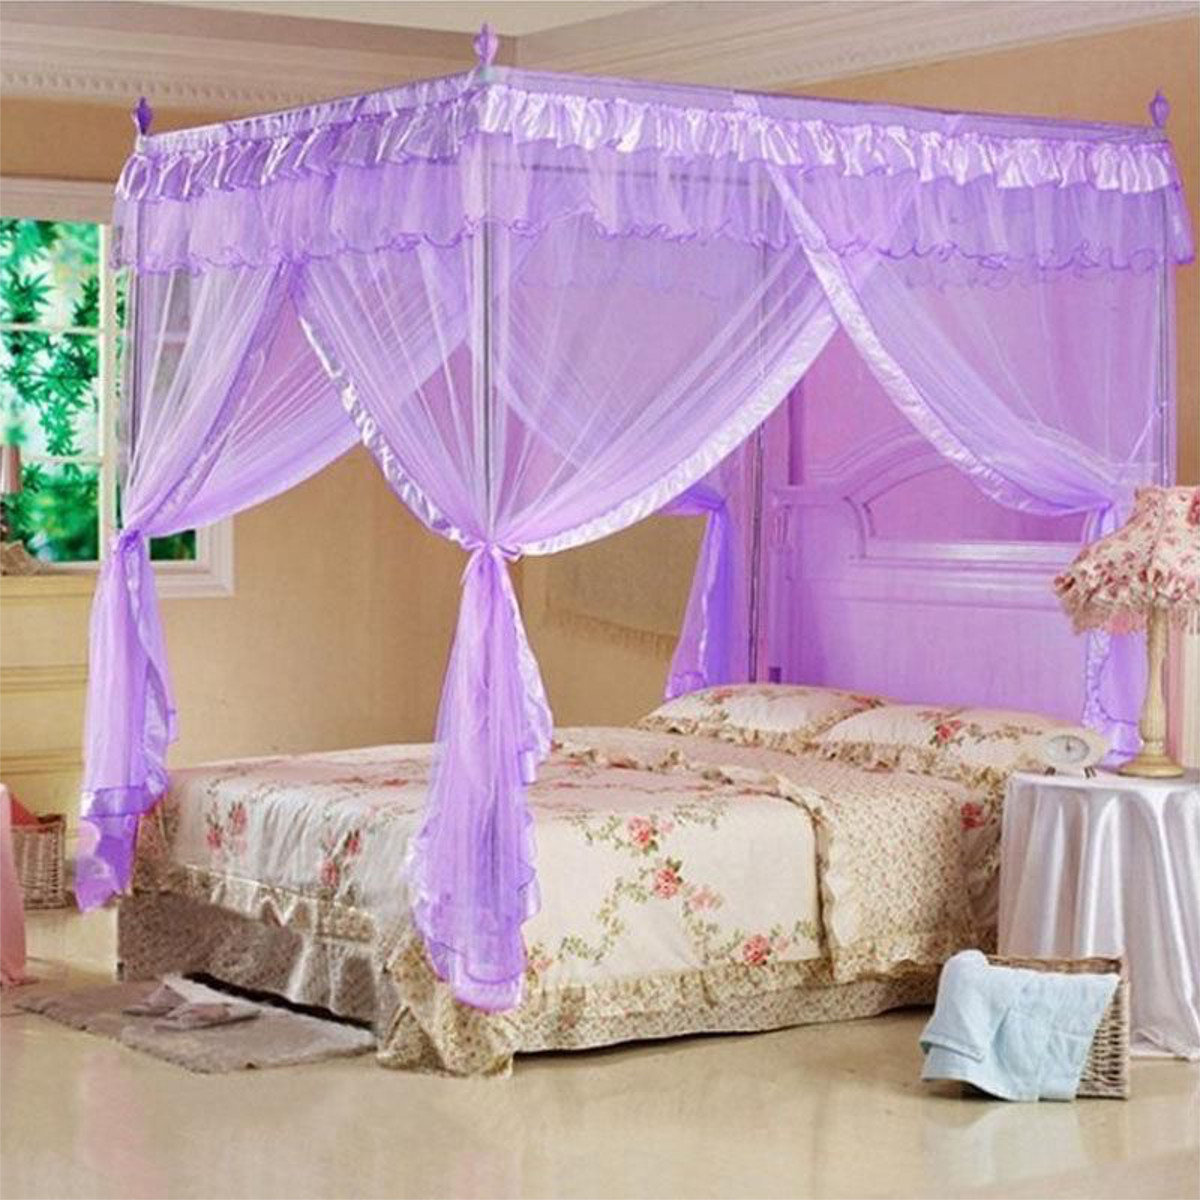 

1.2~1.8M 4 Post Retro Lace Bed Mosquito Net With Bracket Netting Purple Decor Queen King Size